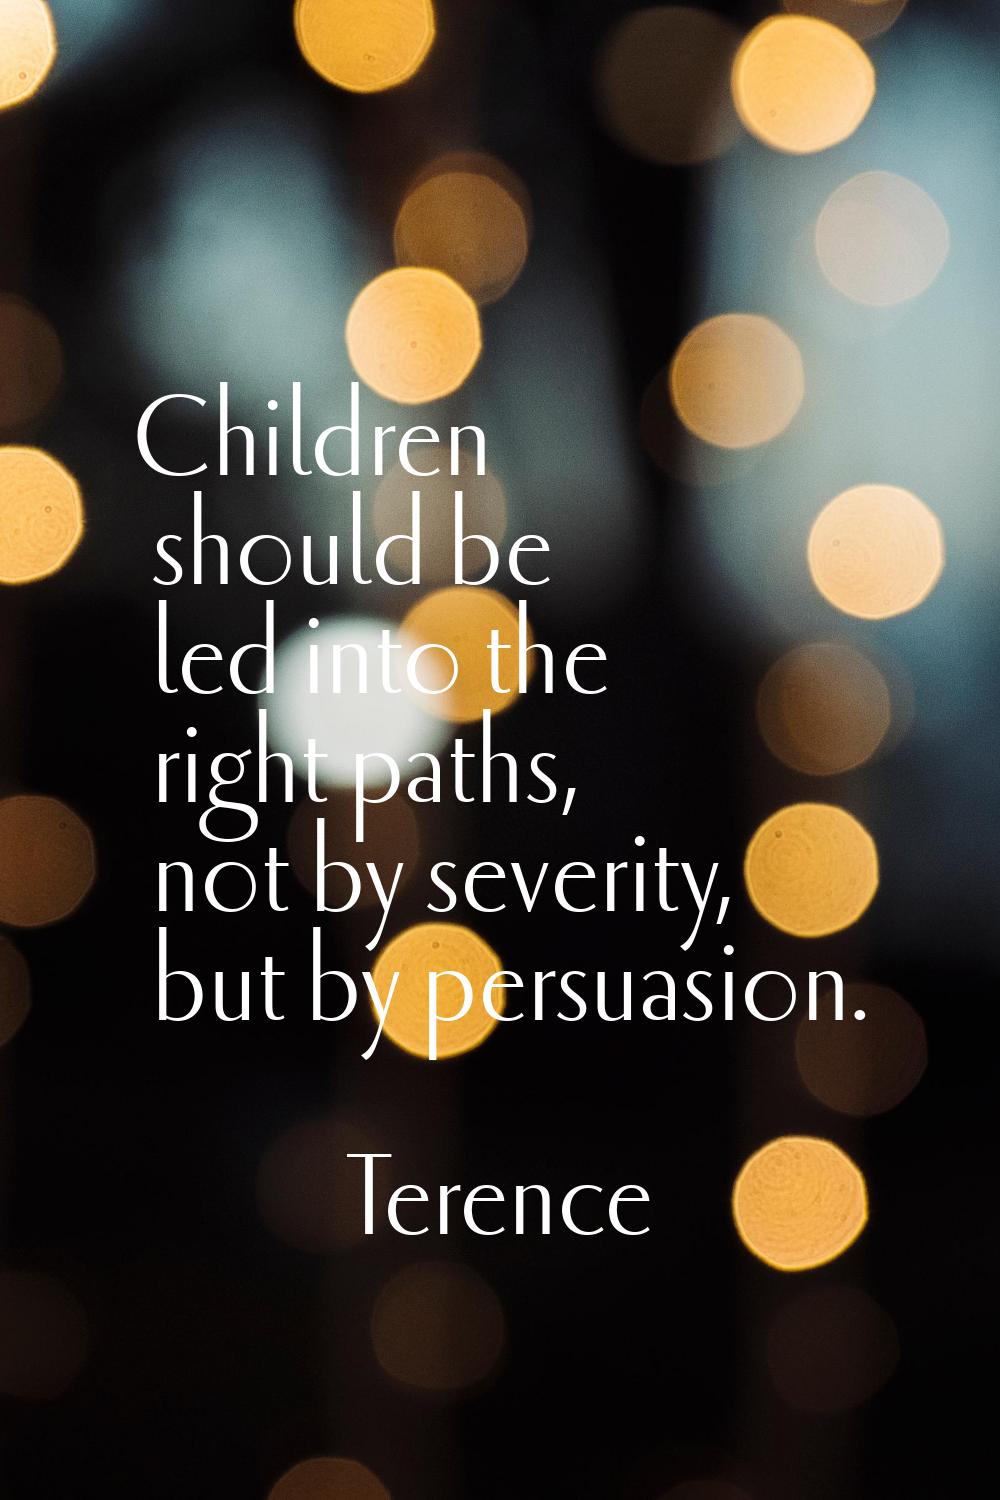 Children should be led into the right paths, not by severity, but by persuasion.